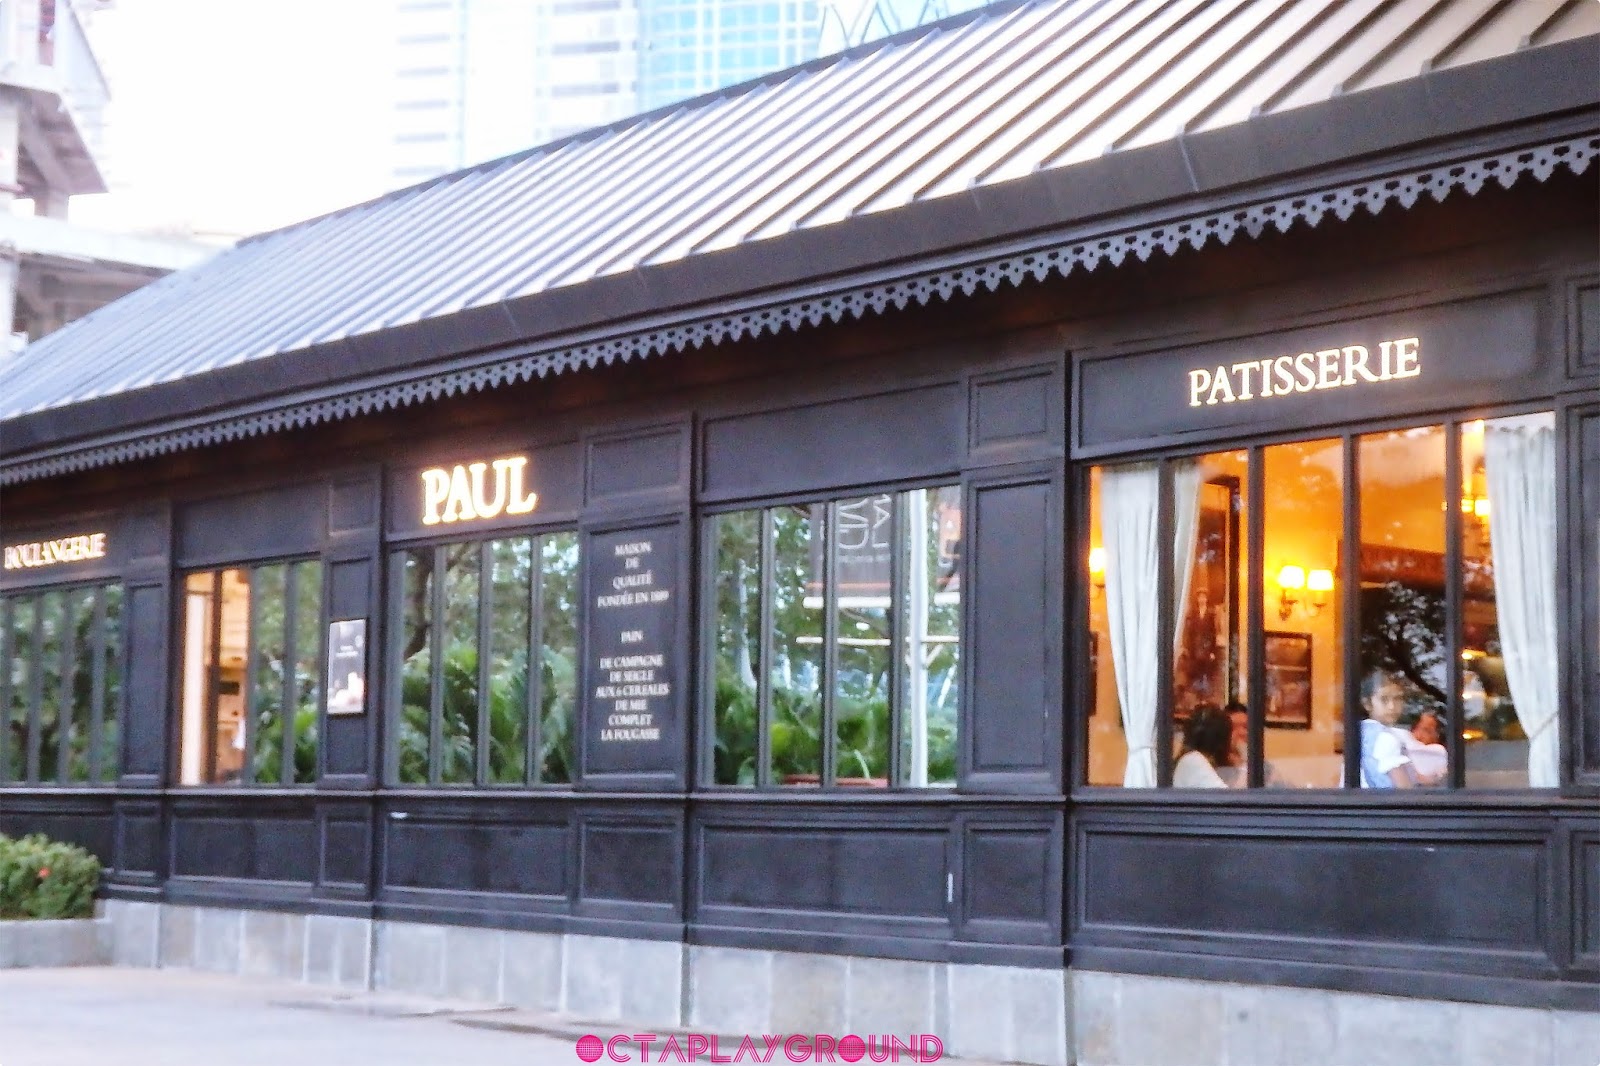 Paul Bakery and Patisserie Indonesia ~ Octa's Playground